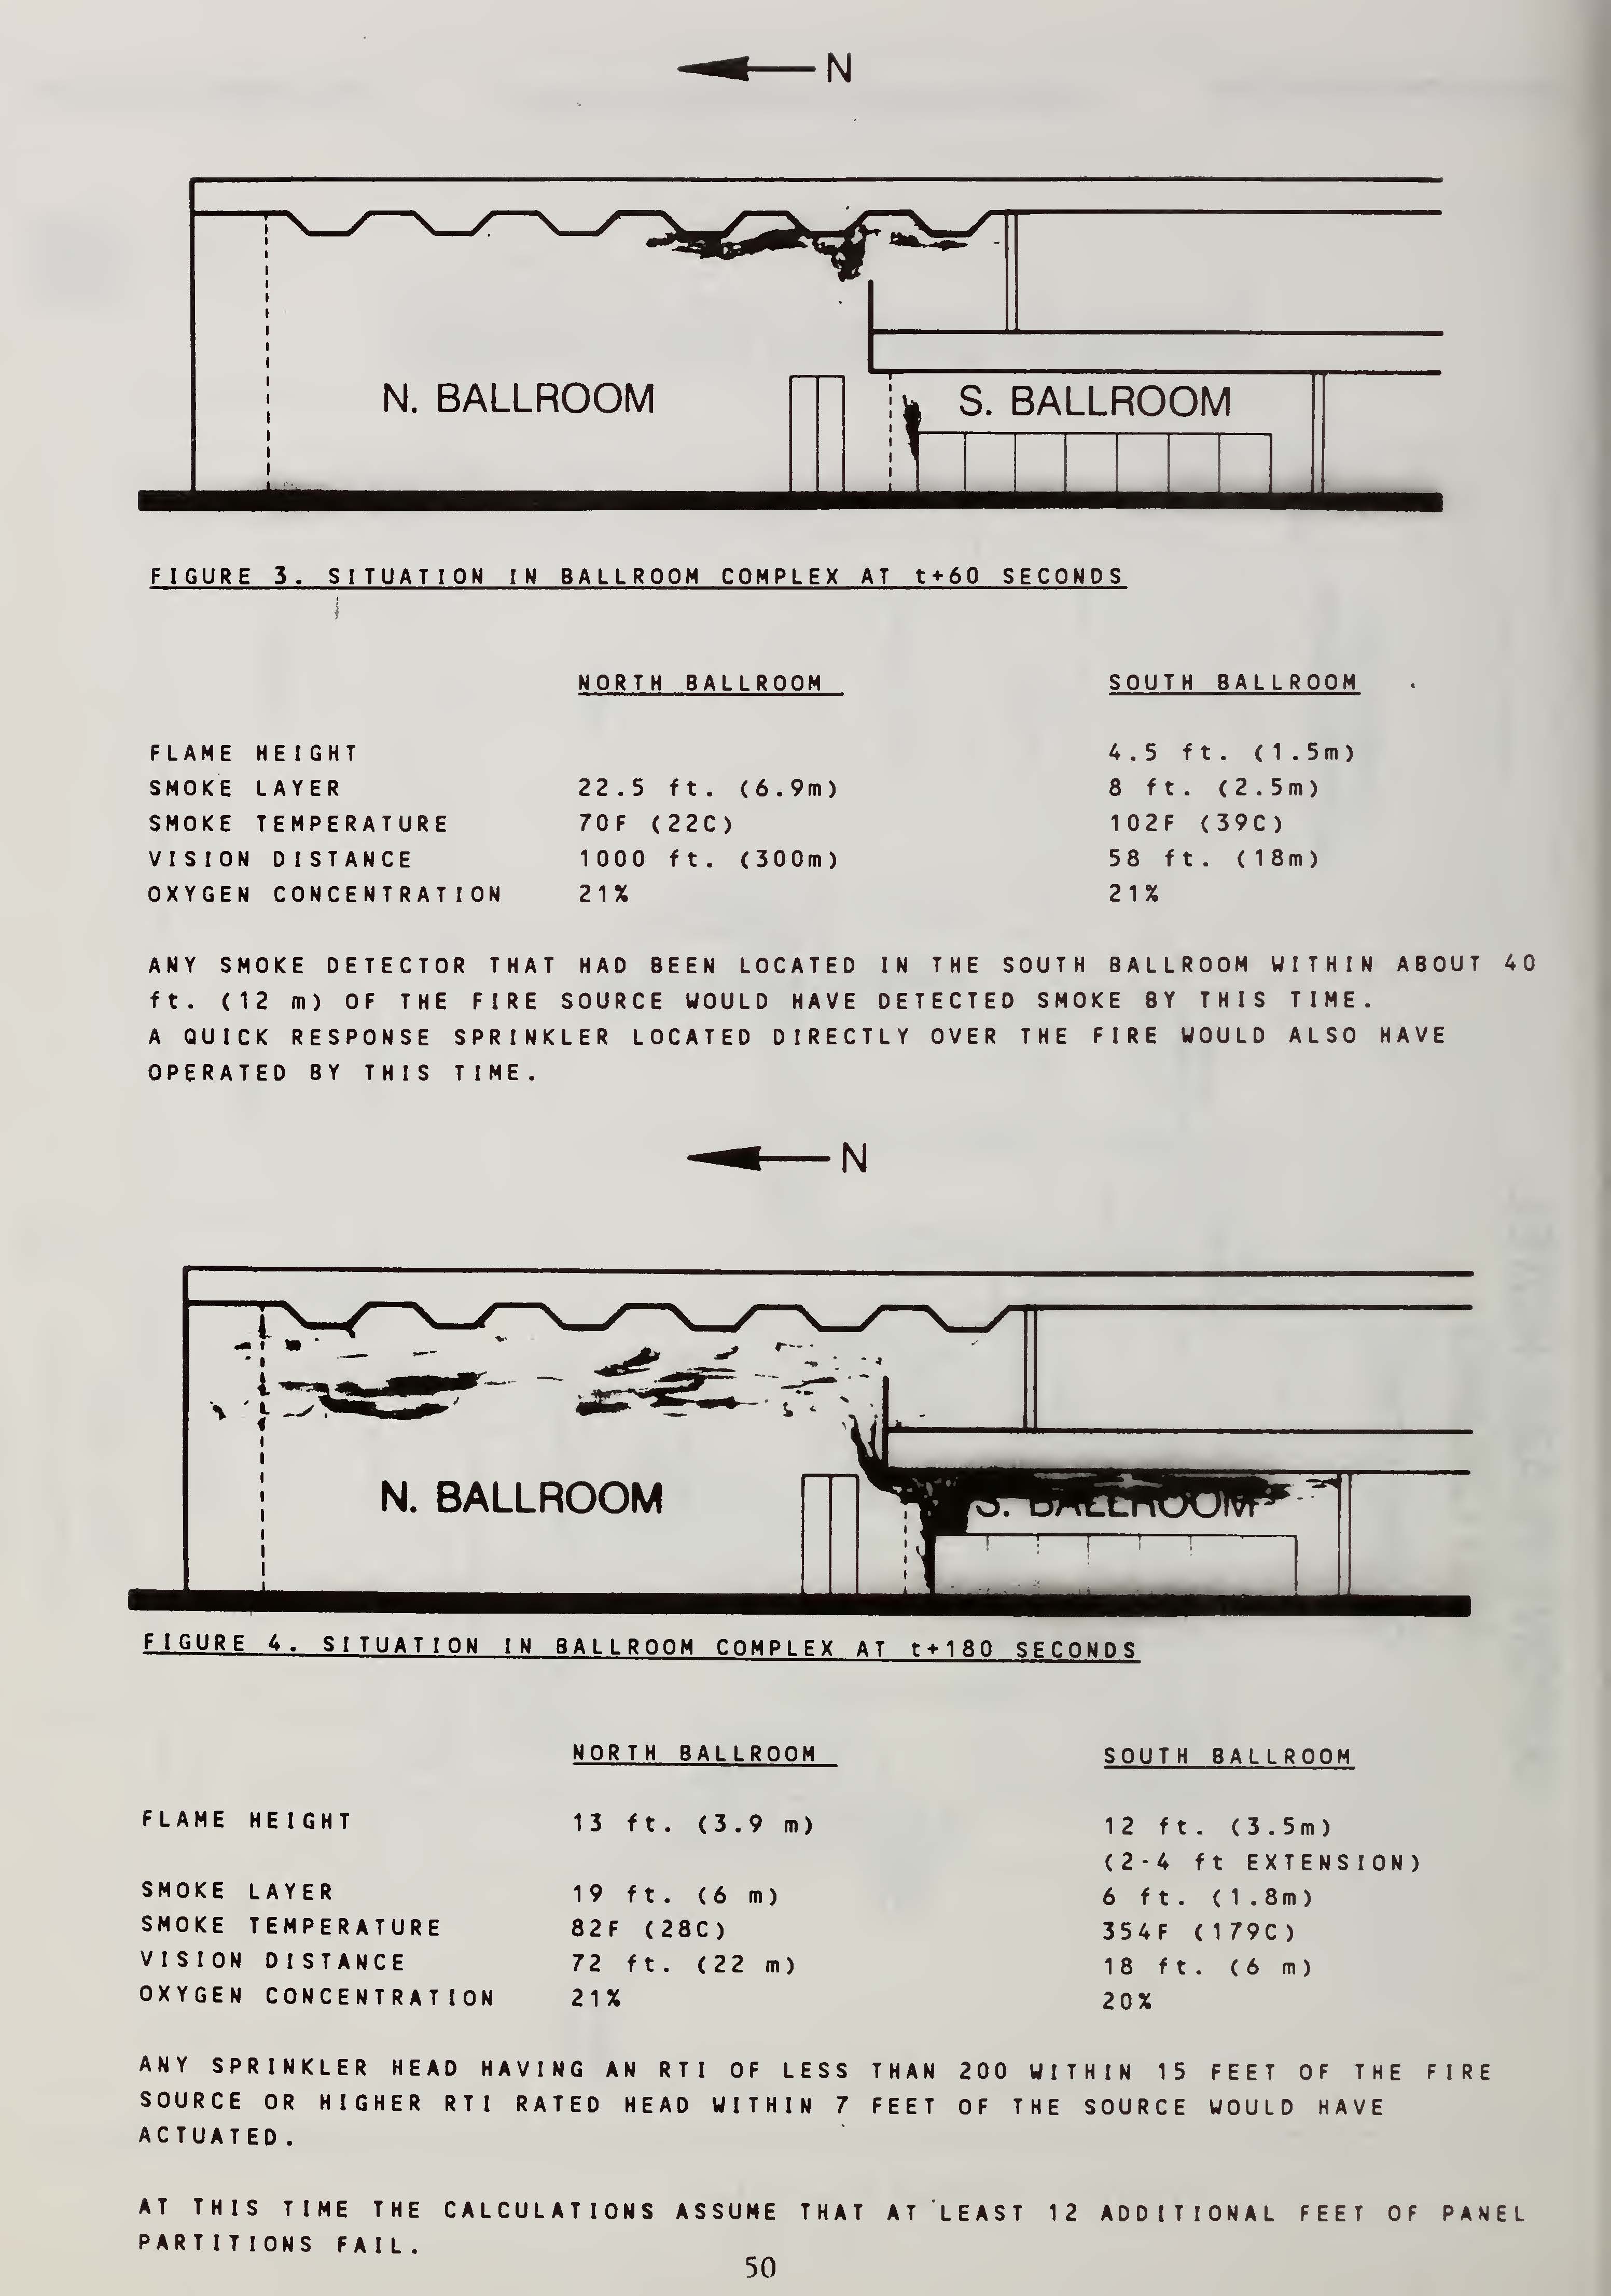 Page 60 from Harold E. Nelson, An Engineering Analysis of the Early Stages of Fire Development – The Fire at the Dupont Plaza Hotel and Casino – December 31, 1986 Gaithersburg, MD: National Institute of Standards and Technology (NIST), 1987, with hand drawn illustrations from the report showing the time-lapsed growth of the fire.  